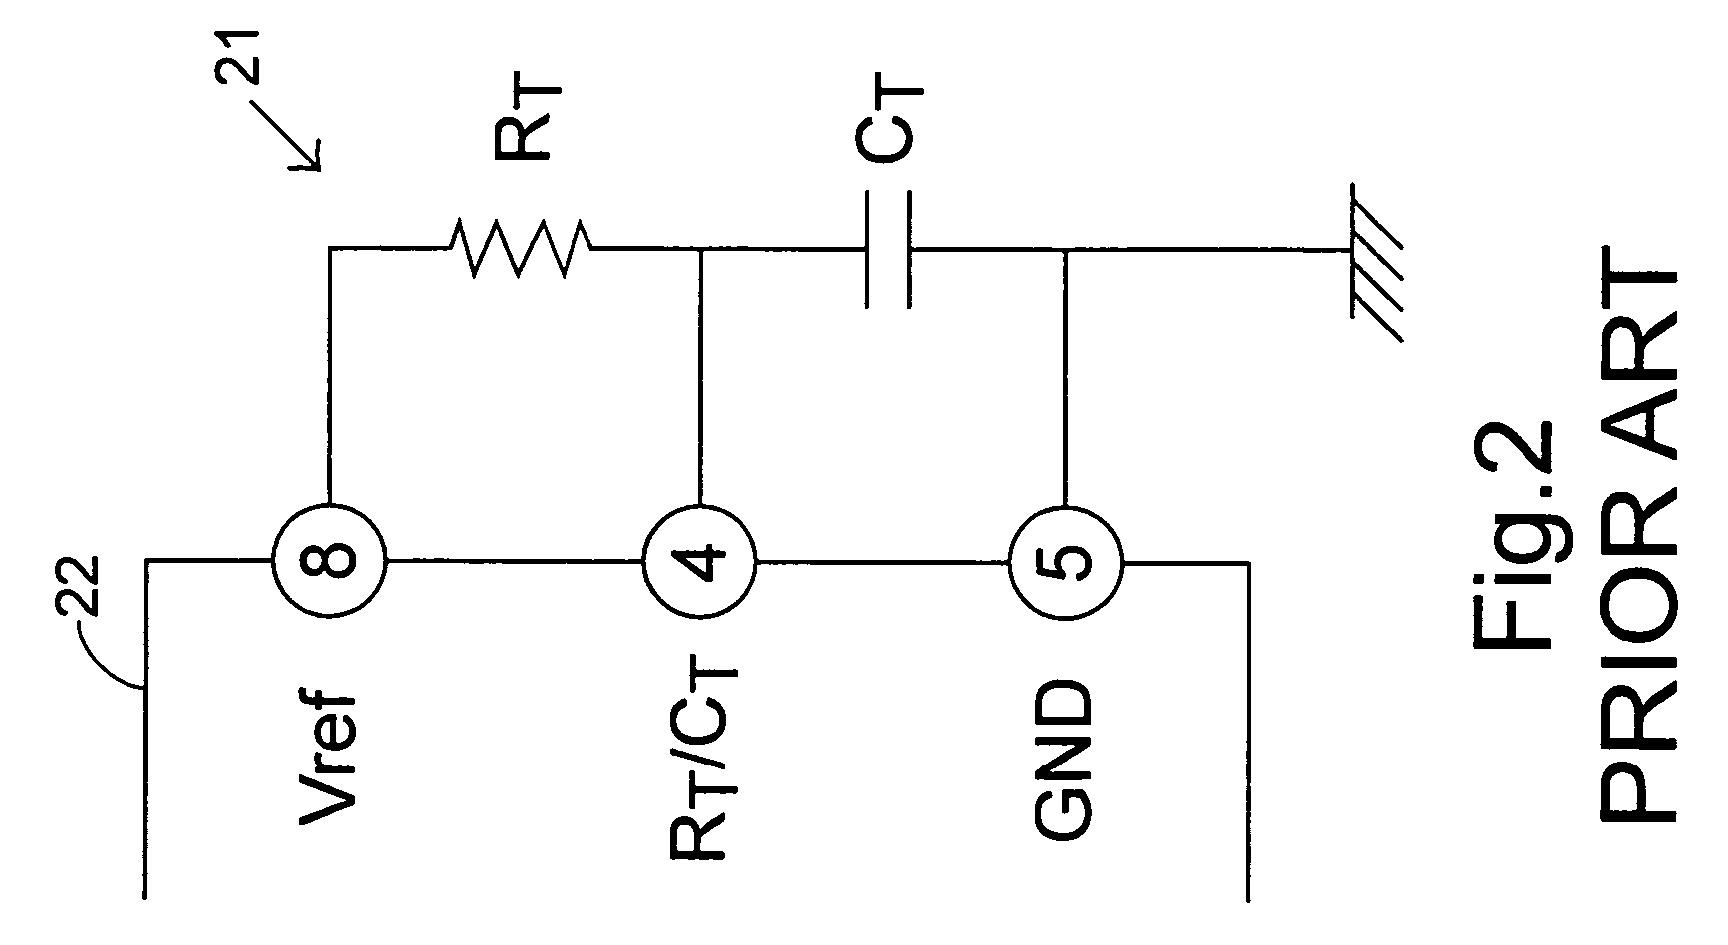 Switching power supply utilizing oscillator frequency tuner for load driving capability under peak load condition